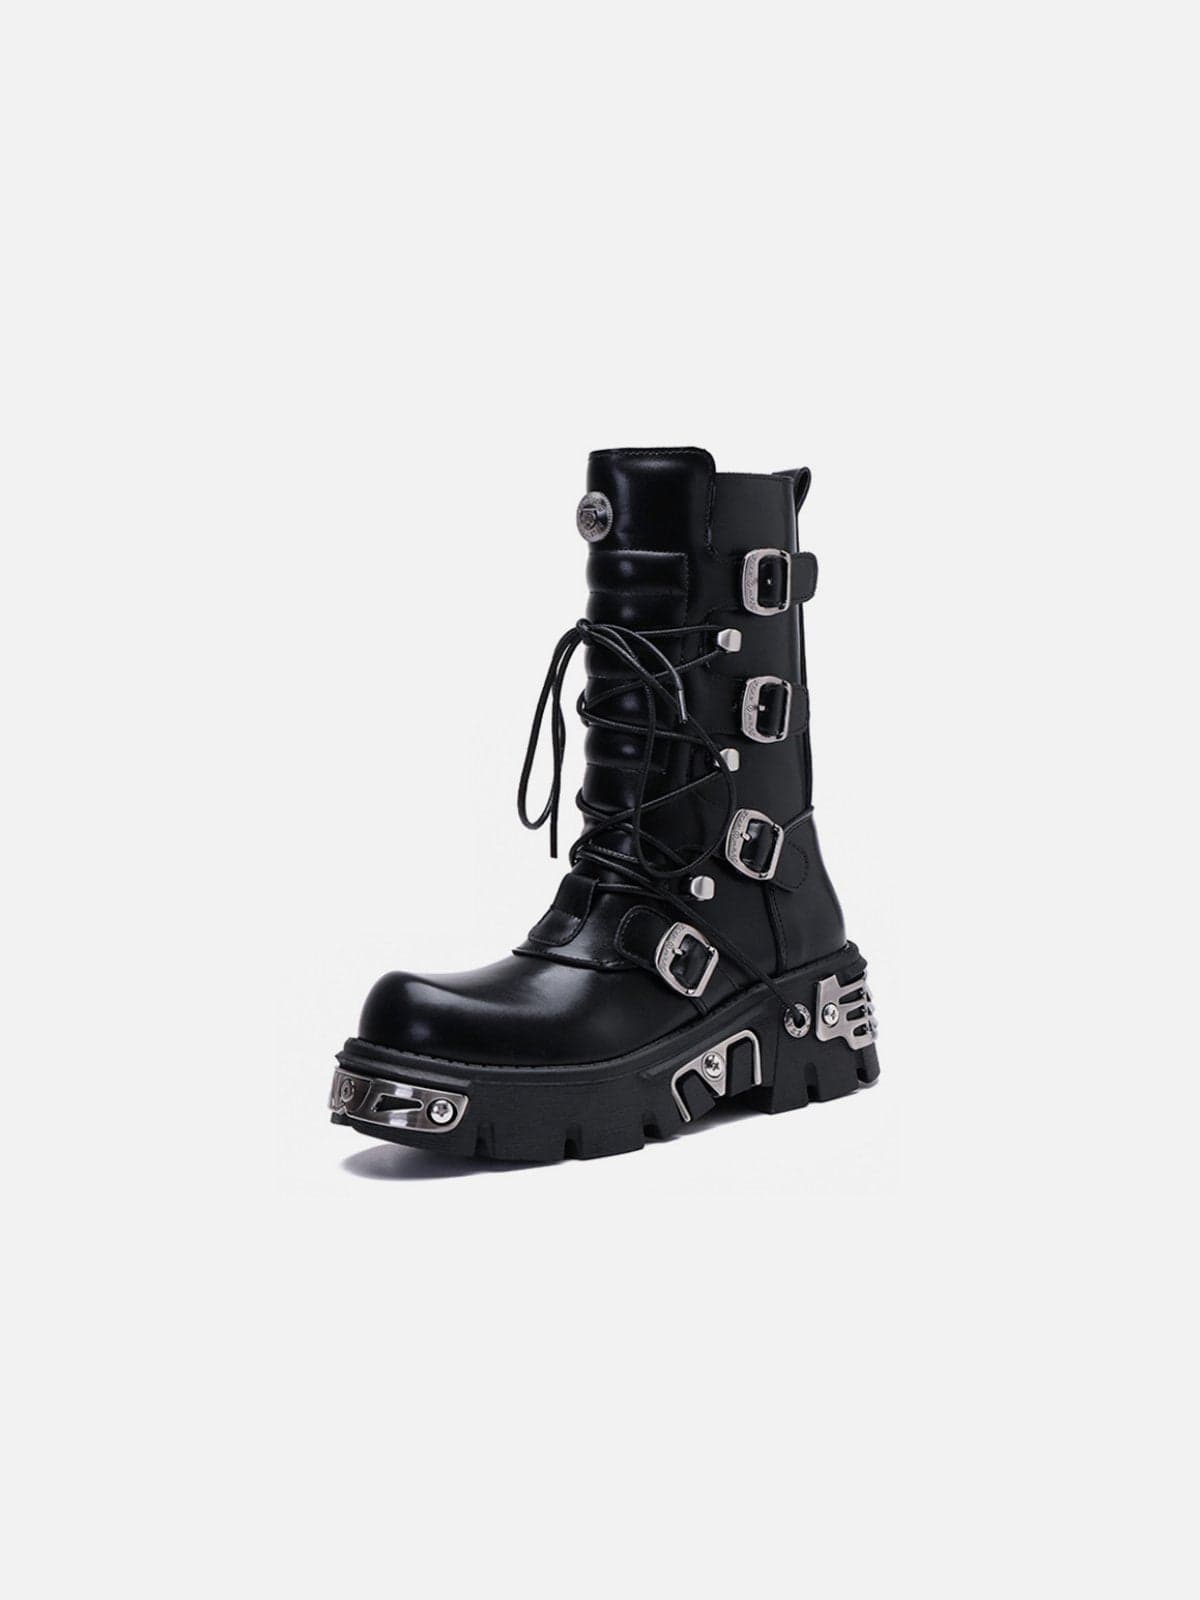 NEV Punk Metal Buckle Knight Boots